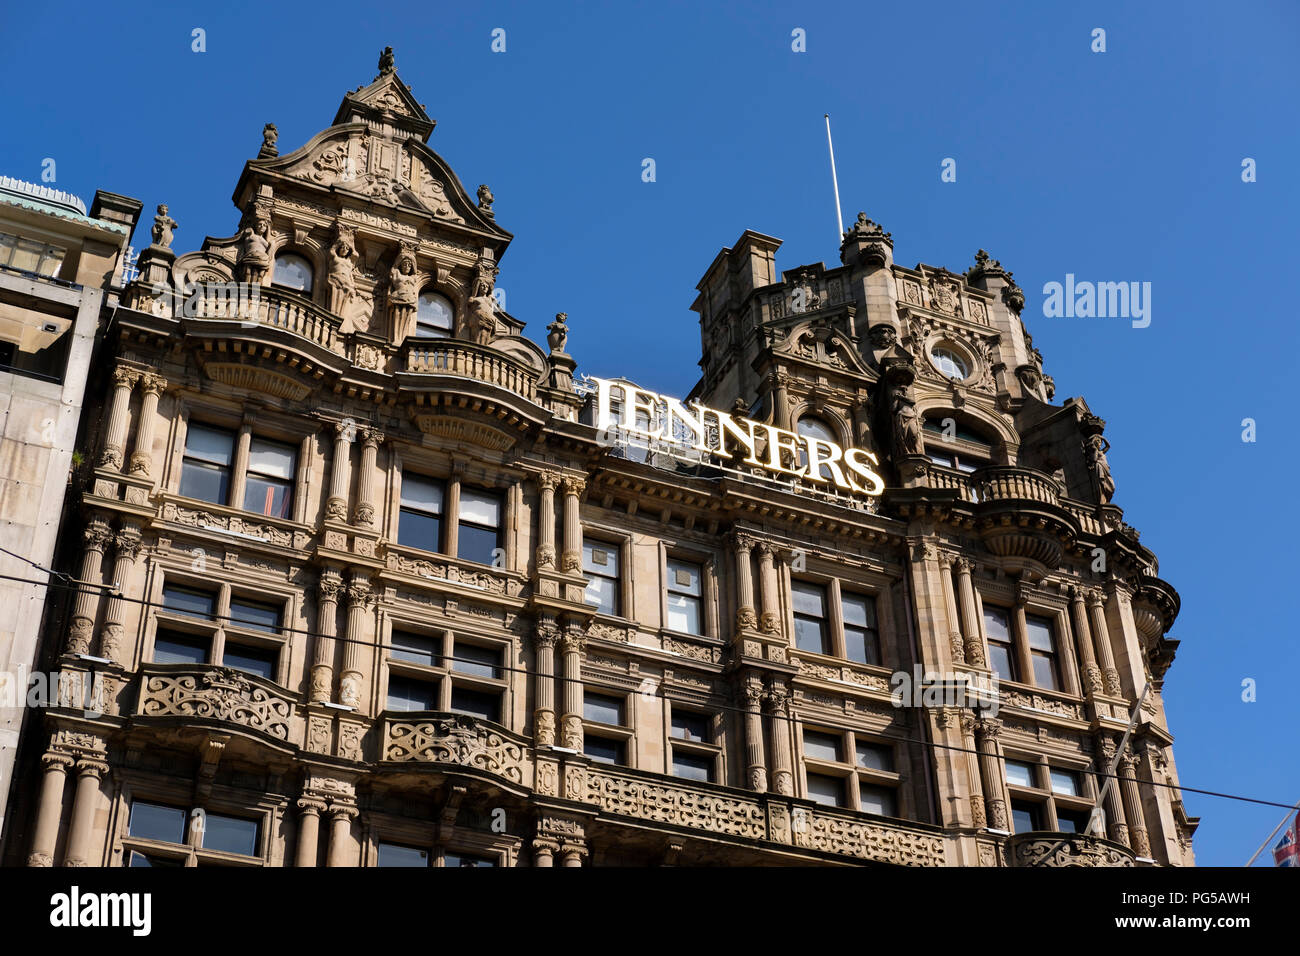 The exterior of Jenners department store, part of House of Fraser, on Princes Street, Edinburgh. Stock Photo